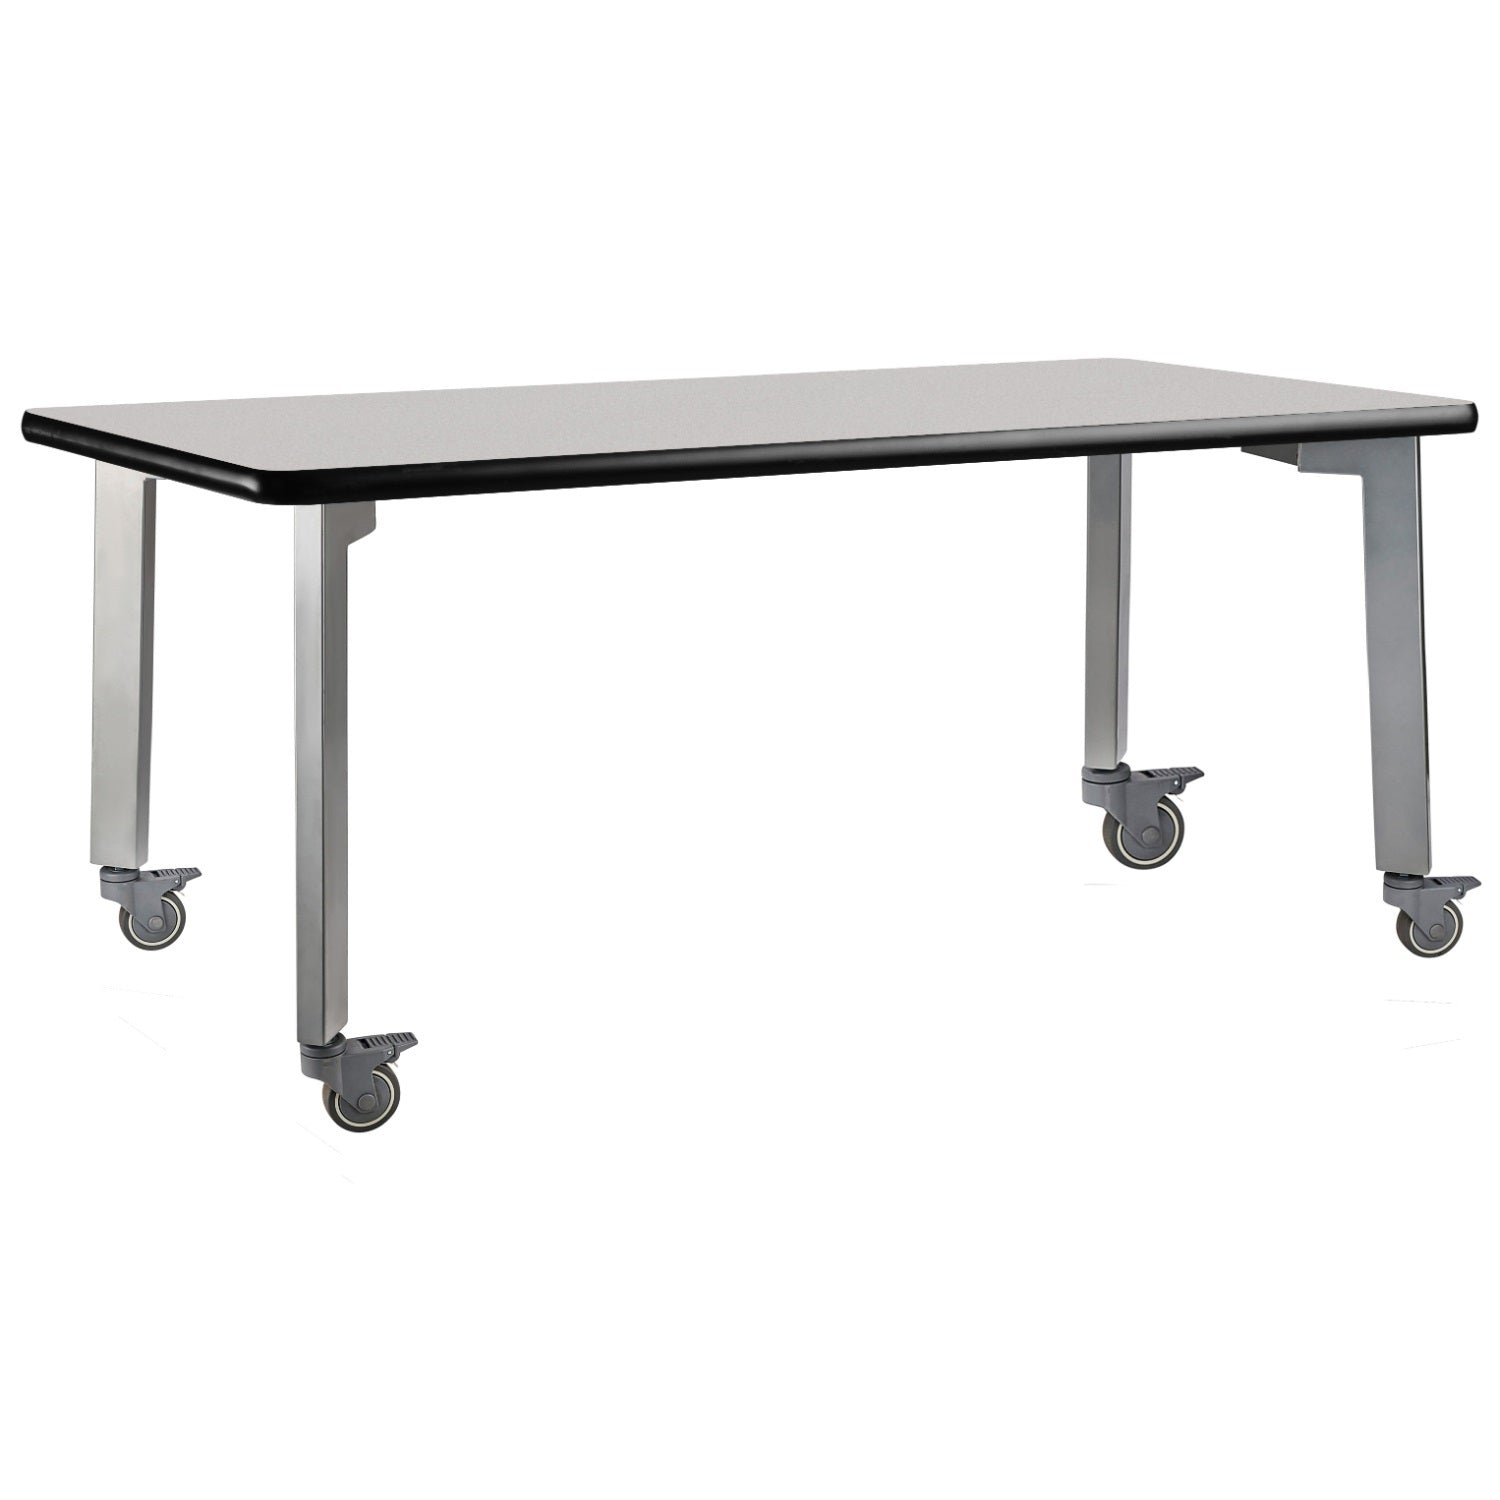 Titan Mobile Table, 36" x 96", Standard High Pressure Laminate Top with Particleboard Core and T-Mold Edge